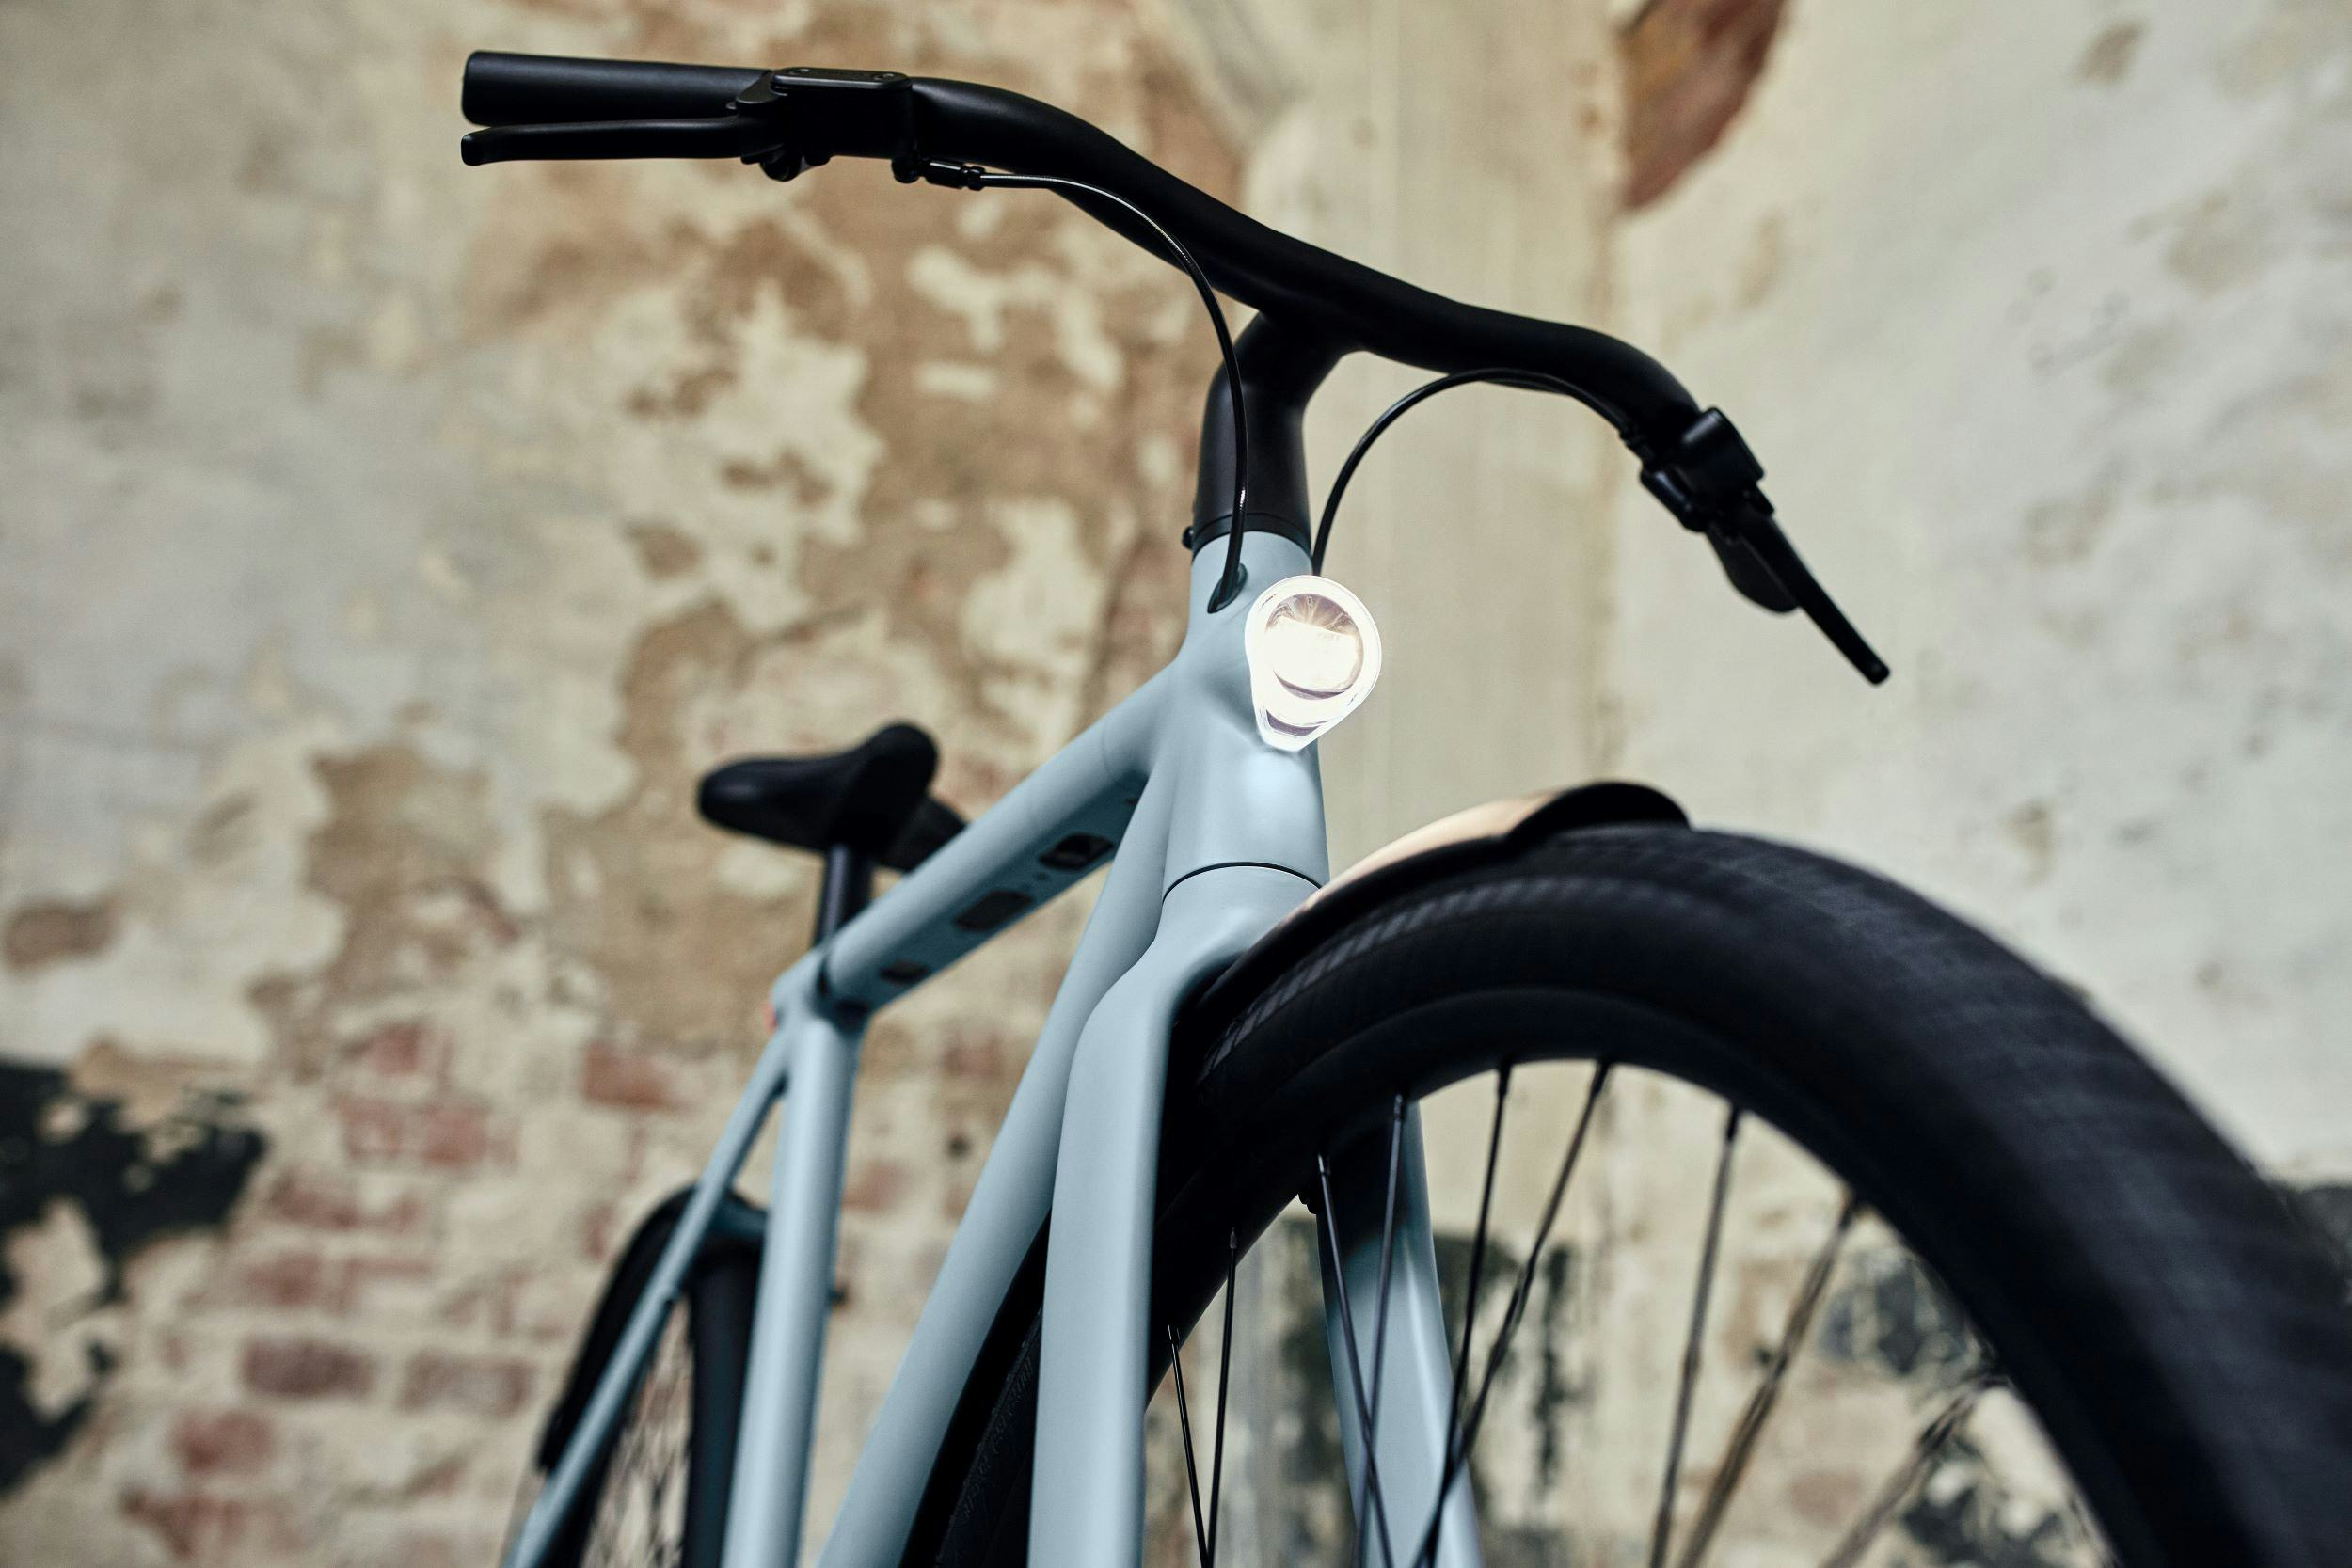 The successful launch of new e-bikes earlier this year has led to an influx of problems and complaints for VanMoof. – Photo VanMoof 